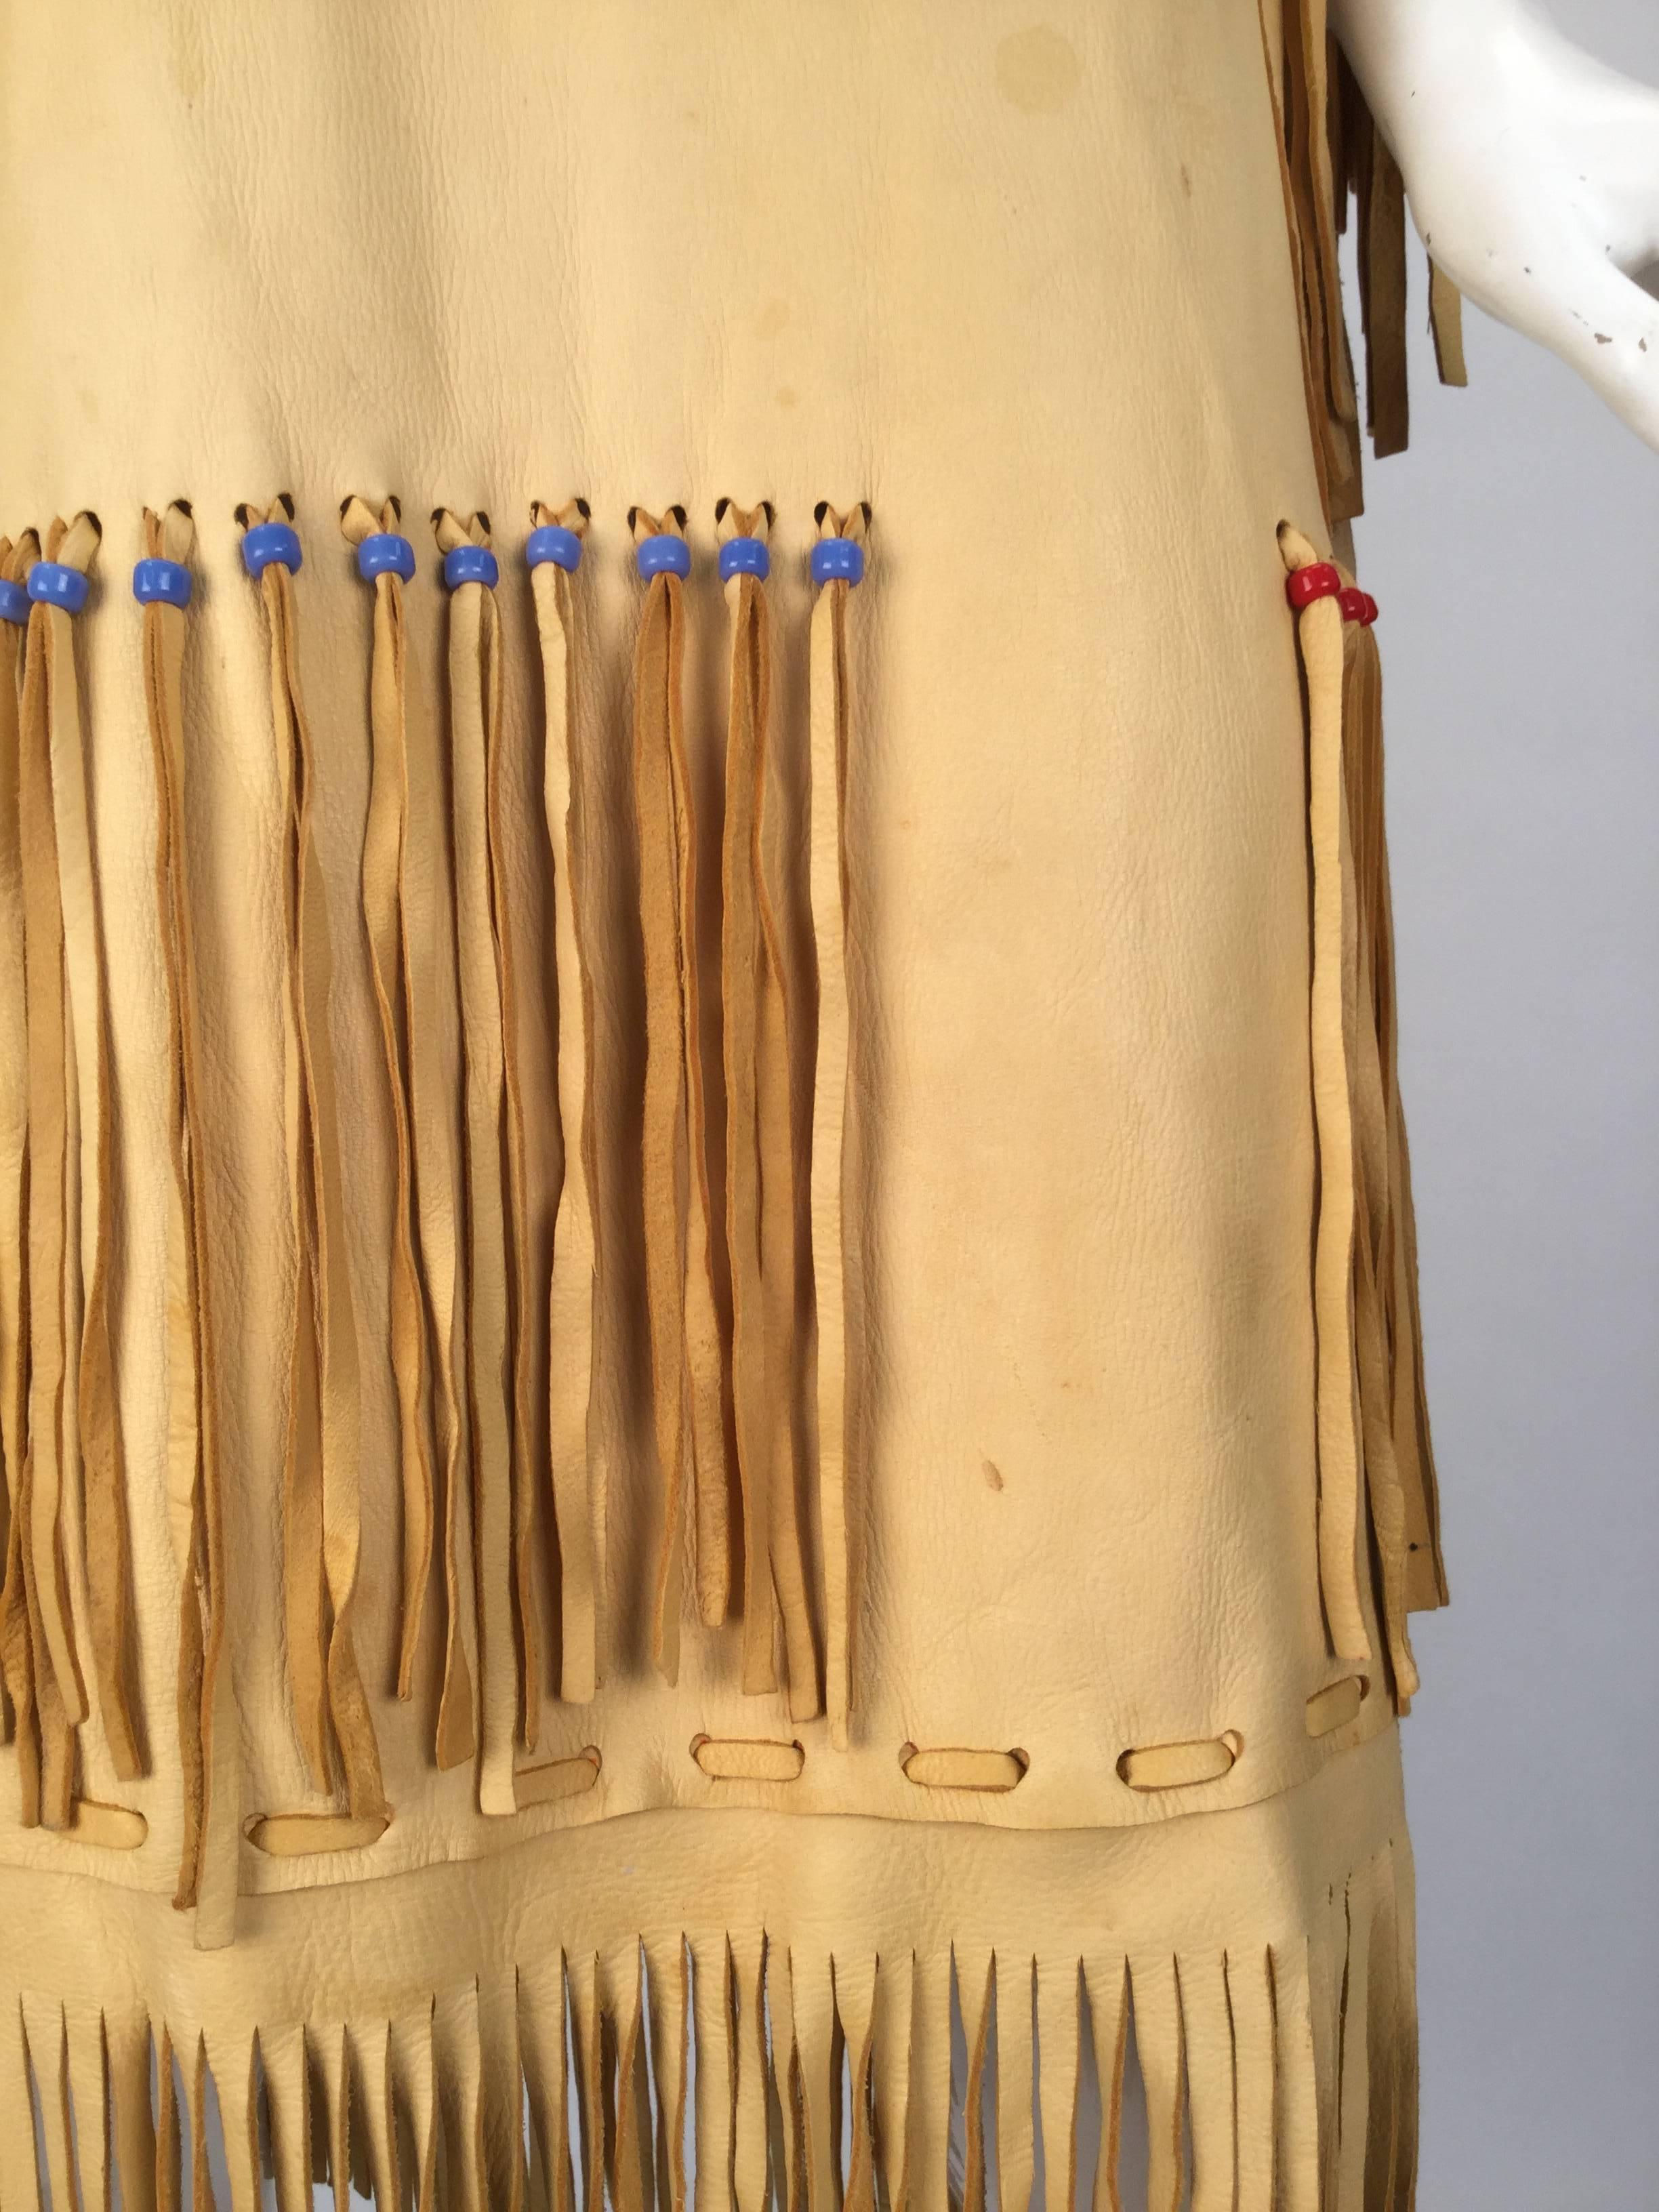 Unbelievable Native American style leather handmade and hand painted fringe dress complete with beading around the fringe hanging from the arms and bottom of the skirt. Completed with a floral hand painted image on the front and the back neckline.